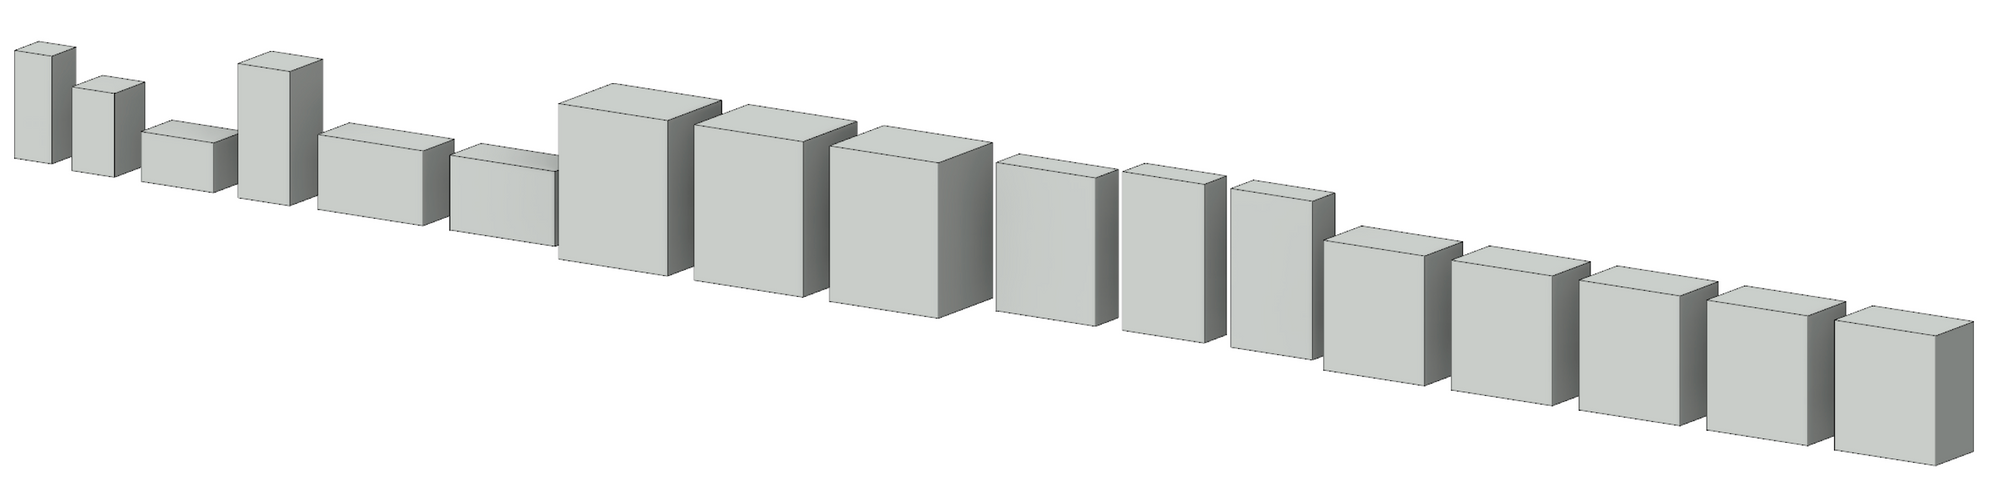 Revit 3D view of all accessories in Coarse level of detail.